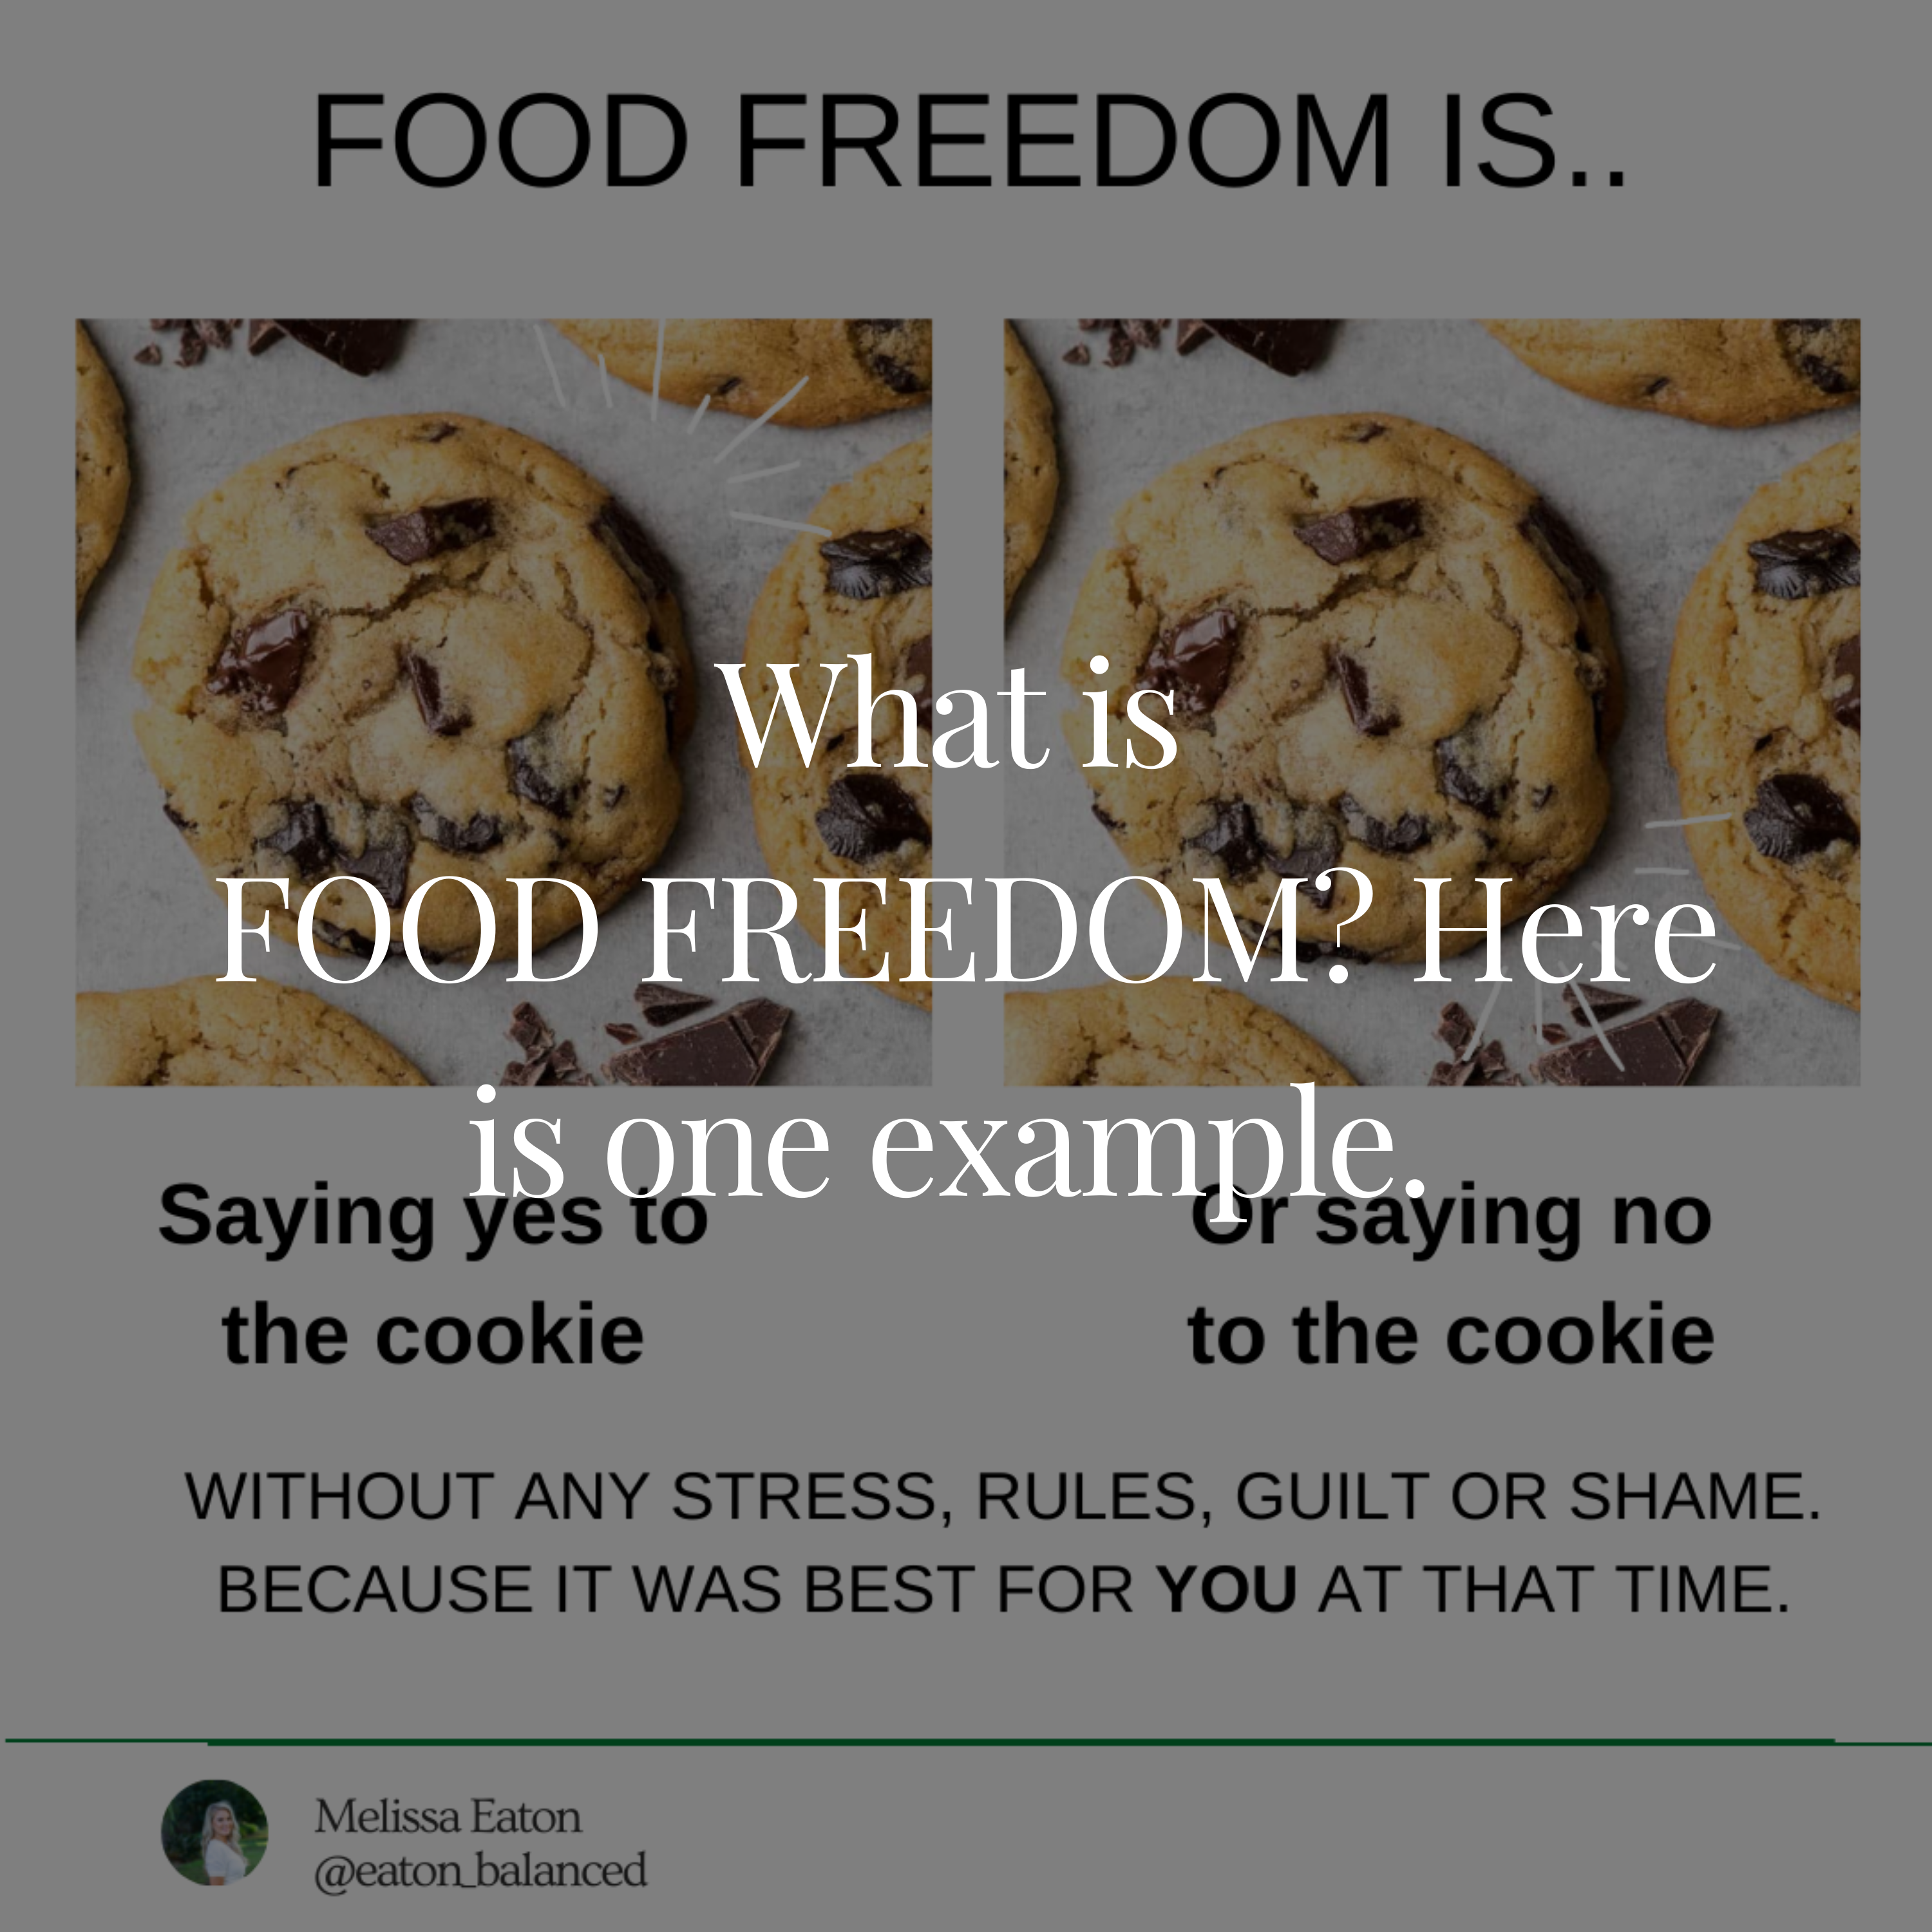 What is food freedom? Here is one example.